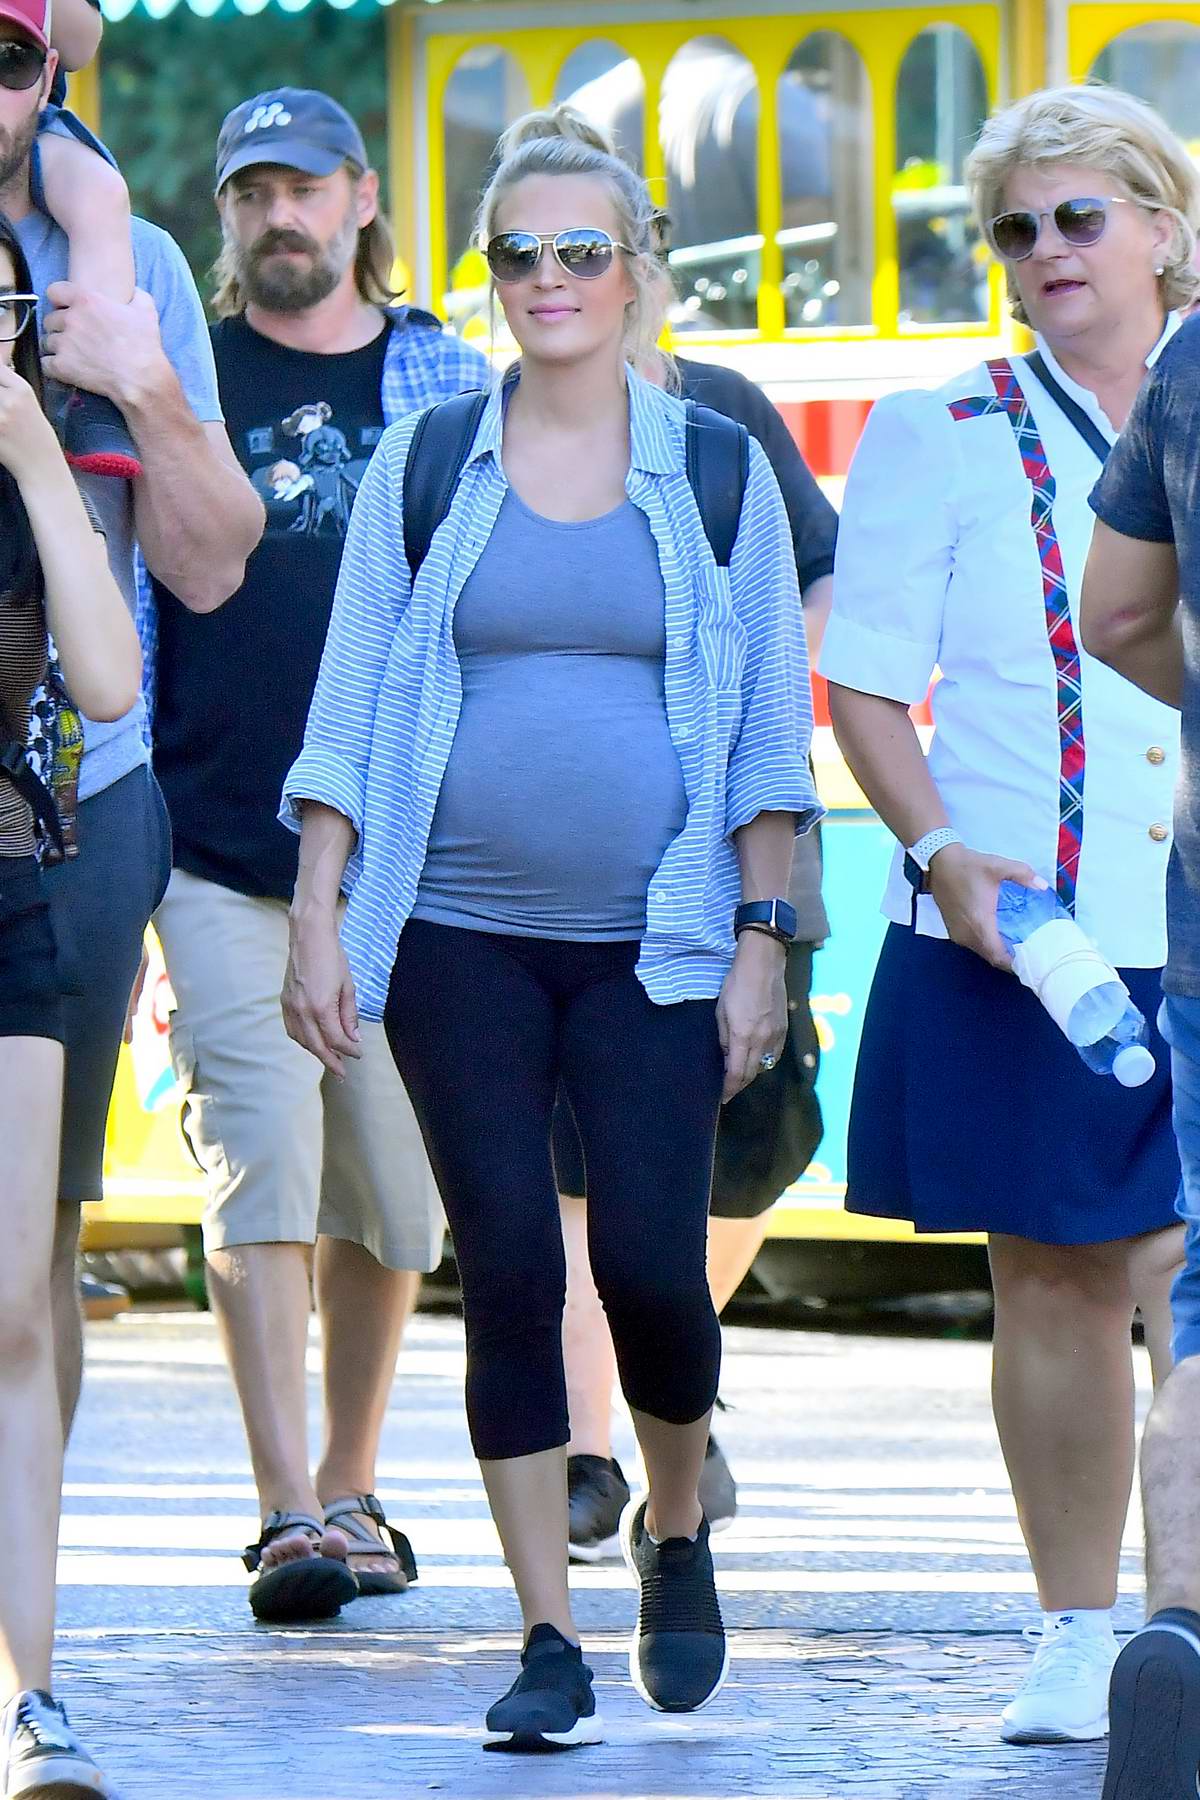 Carrie Underwood spends a day with her family at Disneyland in